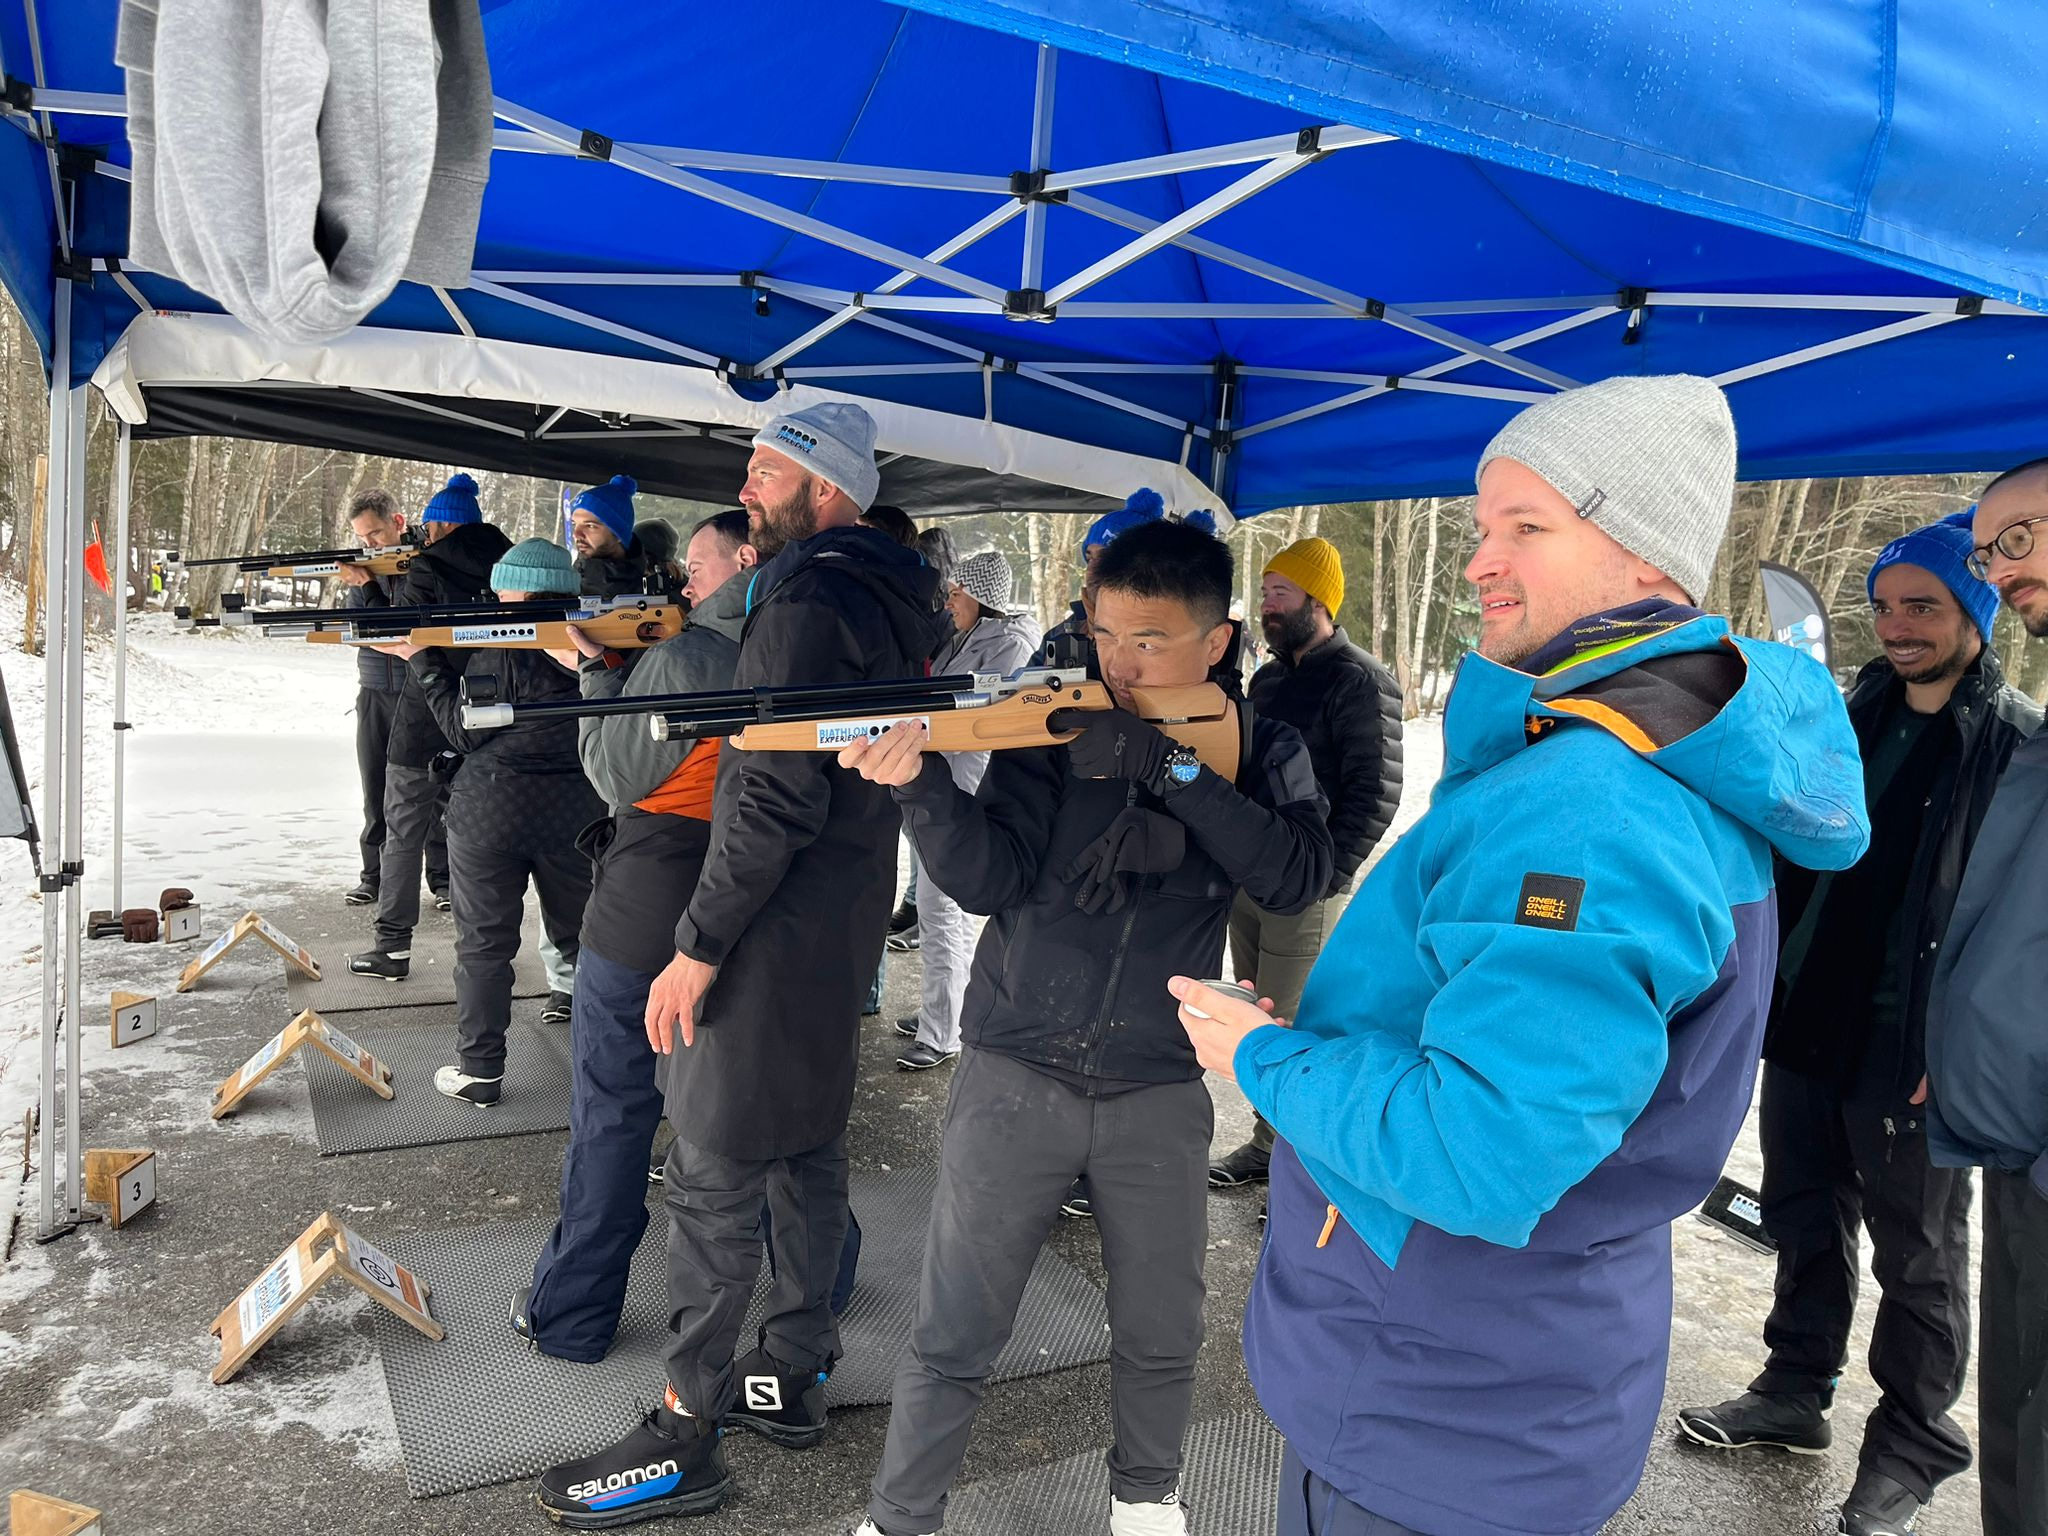 MUI team members standing in a line shooting air rifles as part of a biathlon competition.